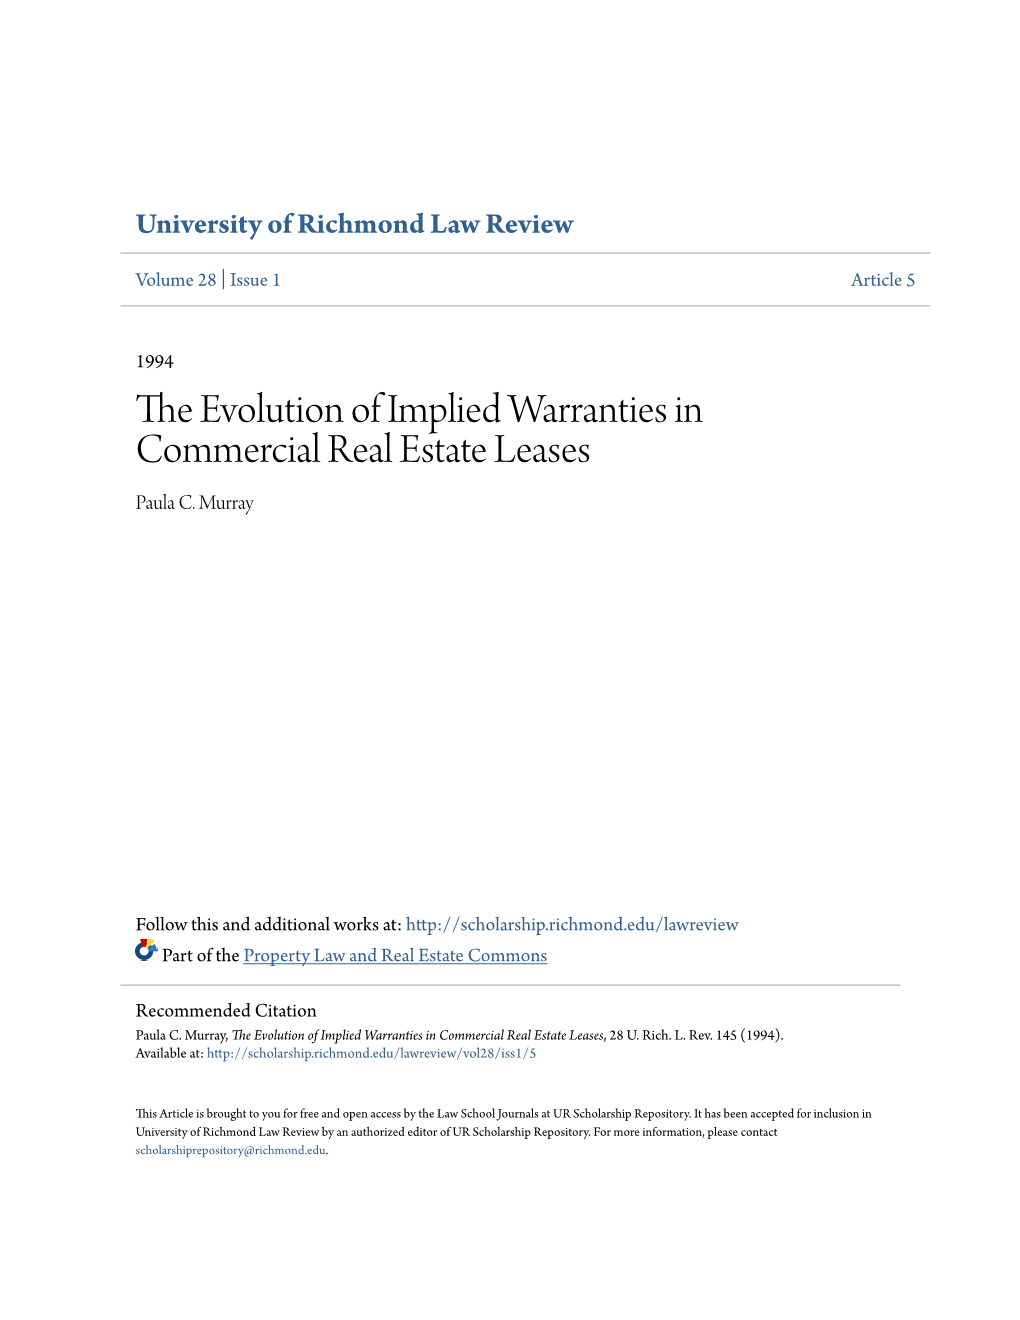 The Evolution of Implied Warranties in Commercial Real Estate Leases, 28 U